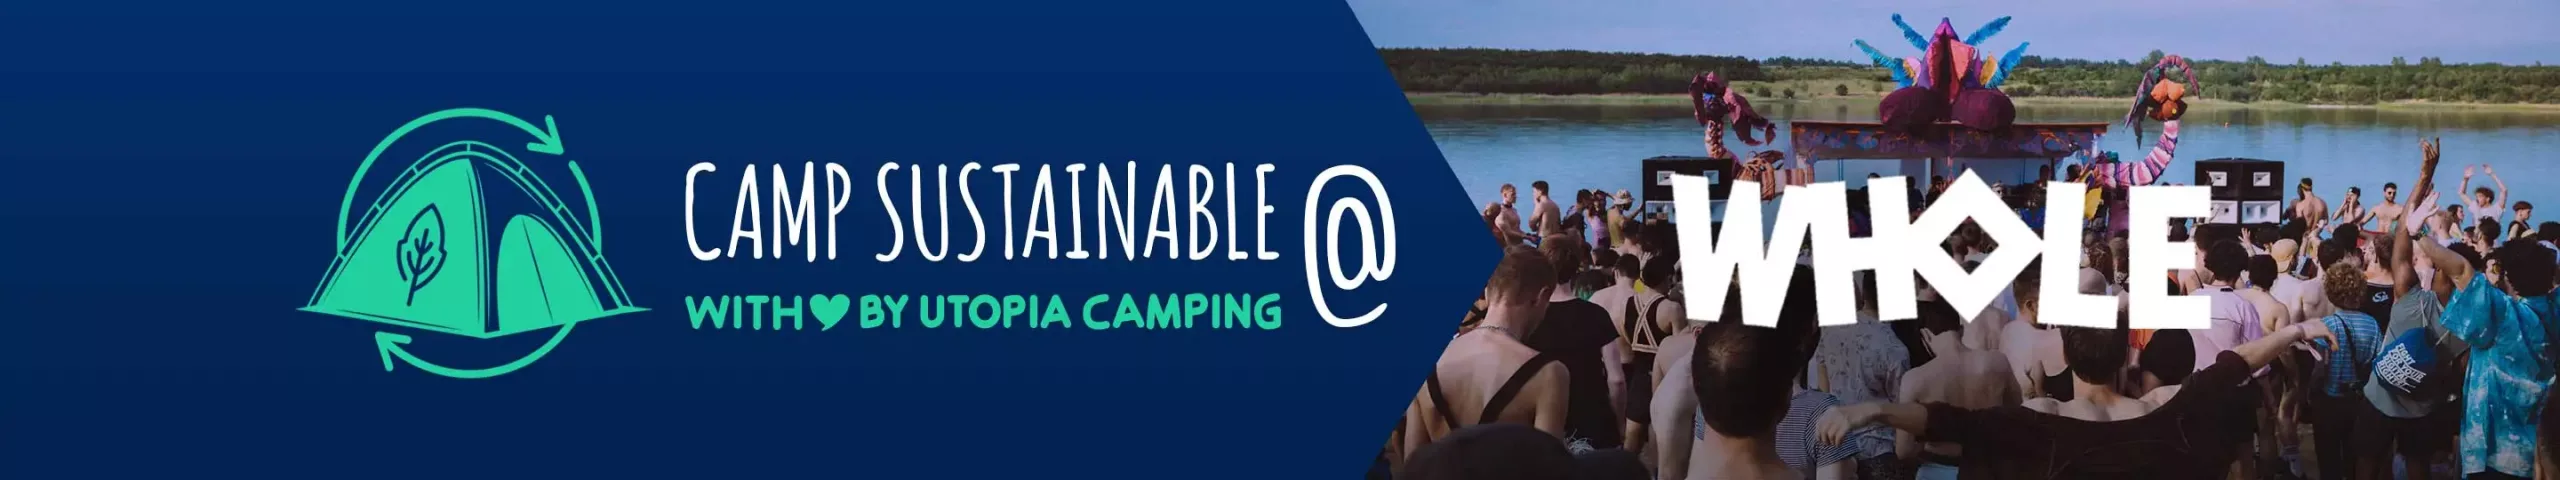 Sustainable solutions for festival-goers - Utopia Camping - With our sustainable solutions at festivals, we tackle piles of garbage full of camping gear by reusing camping stuff left behind. rent a tent, festival, camping equipment for rent